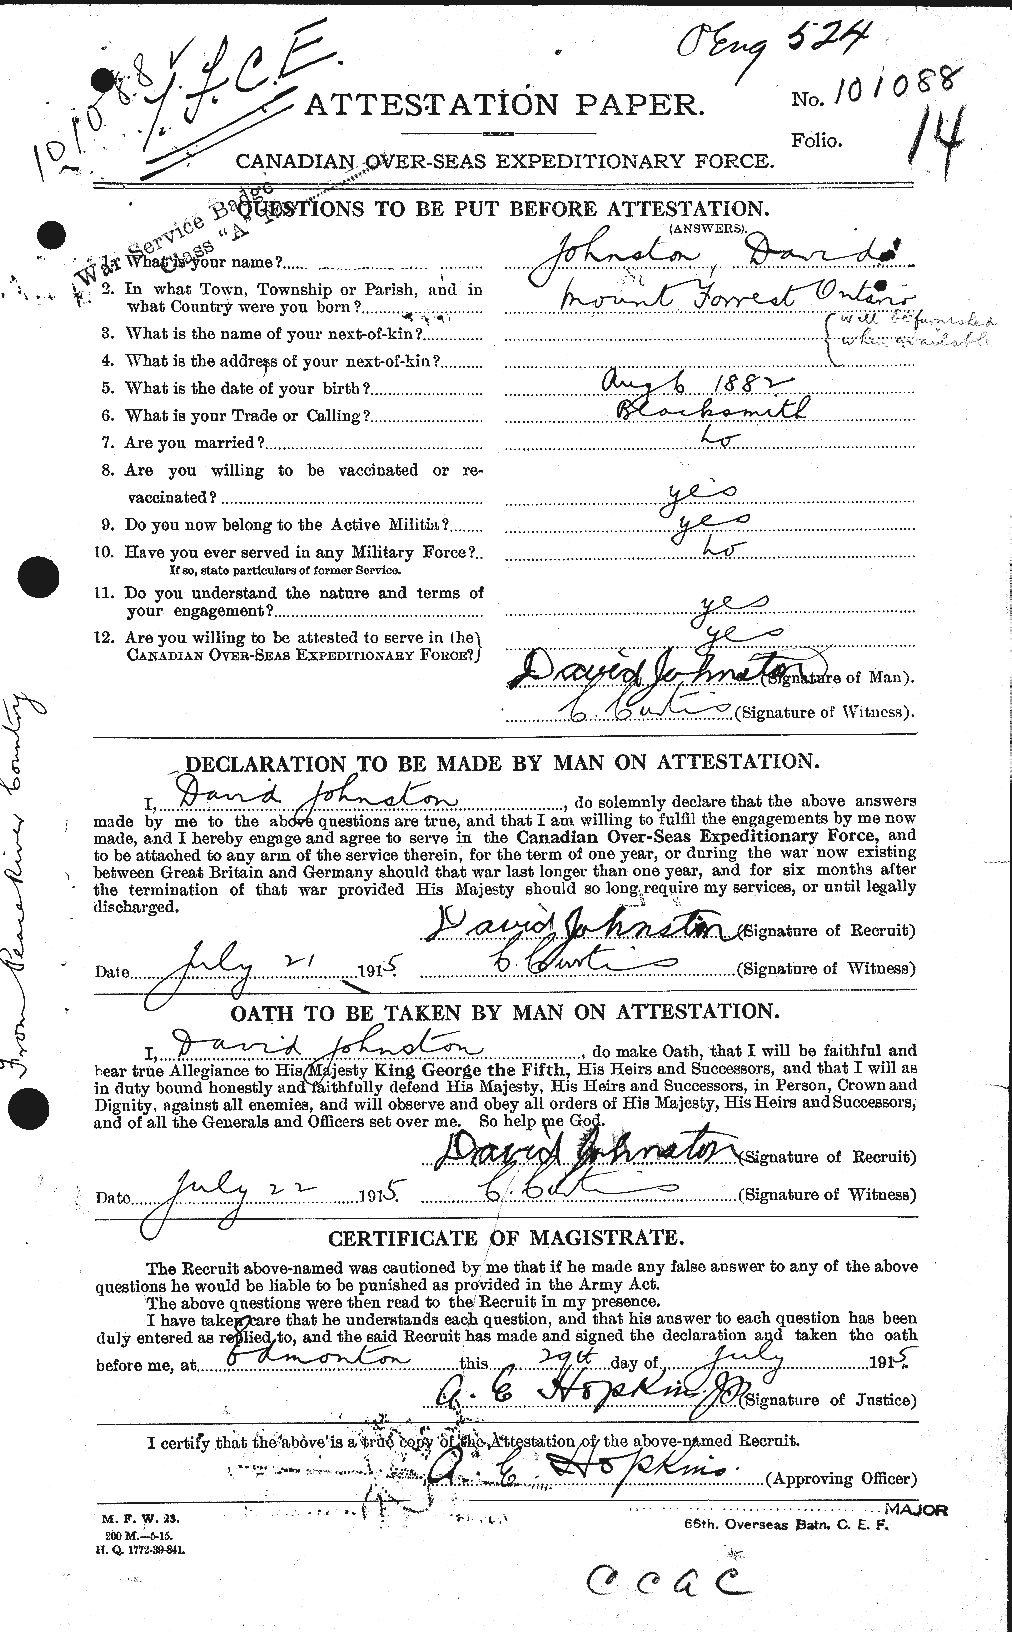 Personnel Records of the First World War - CEF 423150a